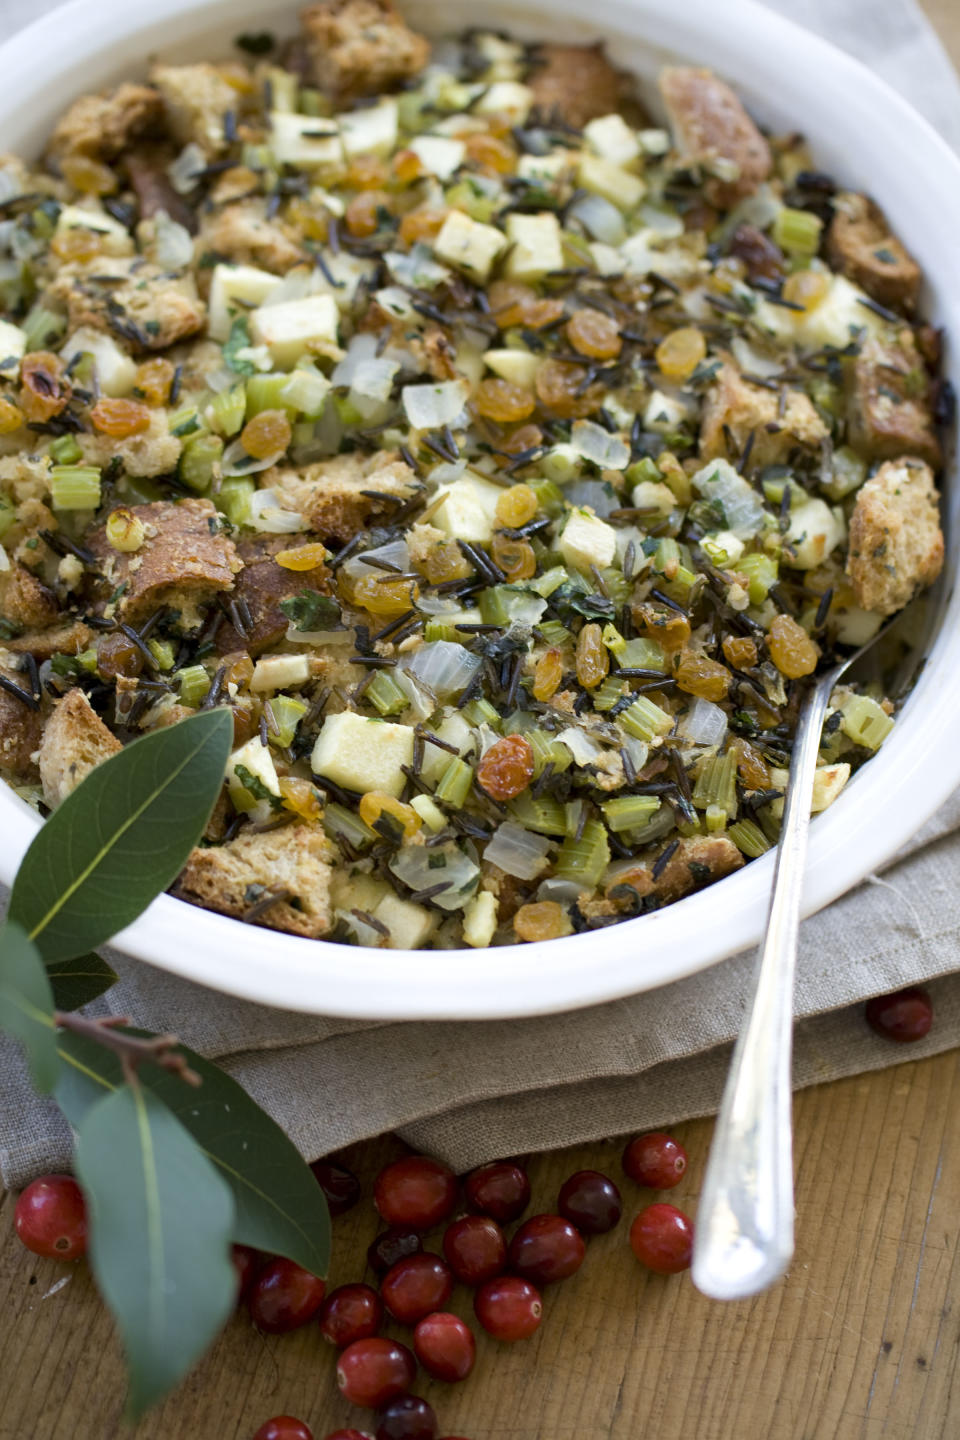 This Oct. 14, 2013 photo shows multigrain and wild rice stuffing with apples and herbs in Concord, N.H. (AP Photo/Matthew Mead)